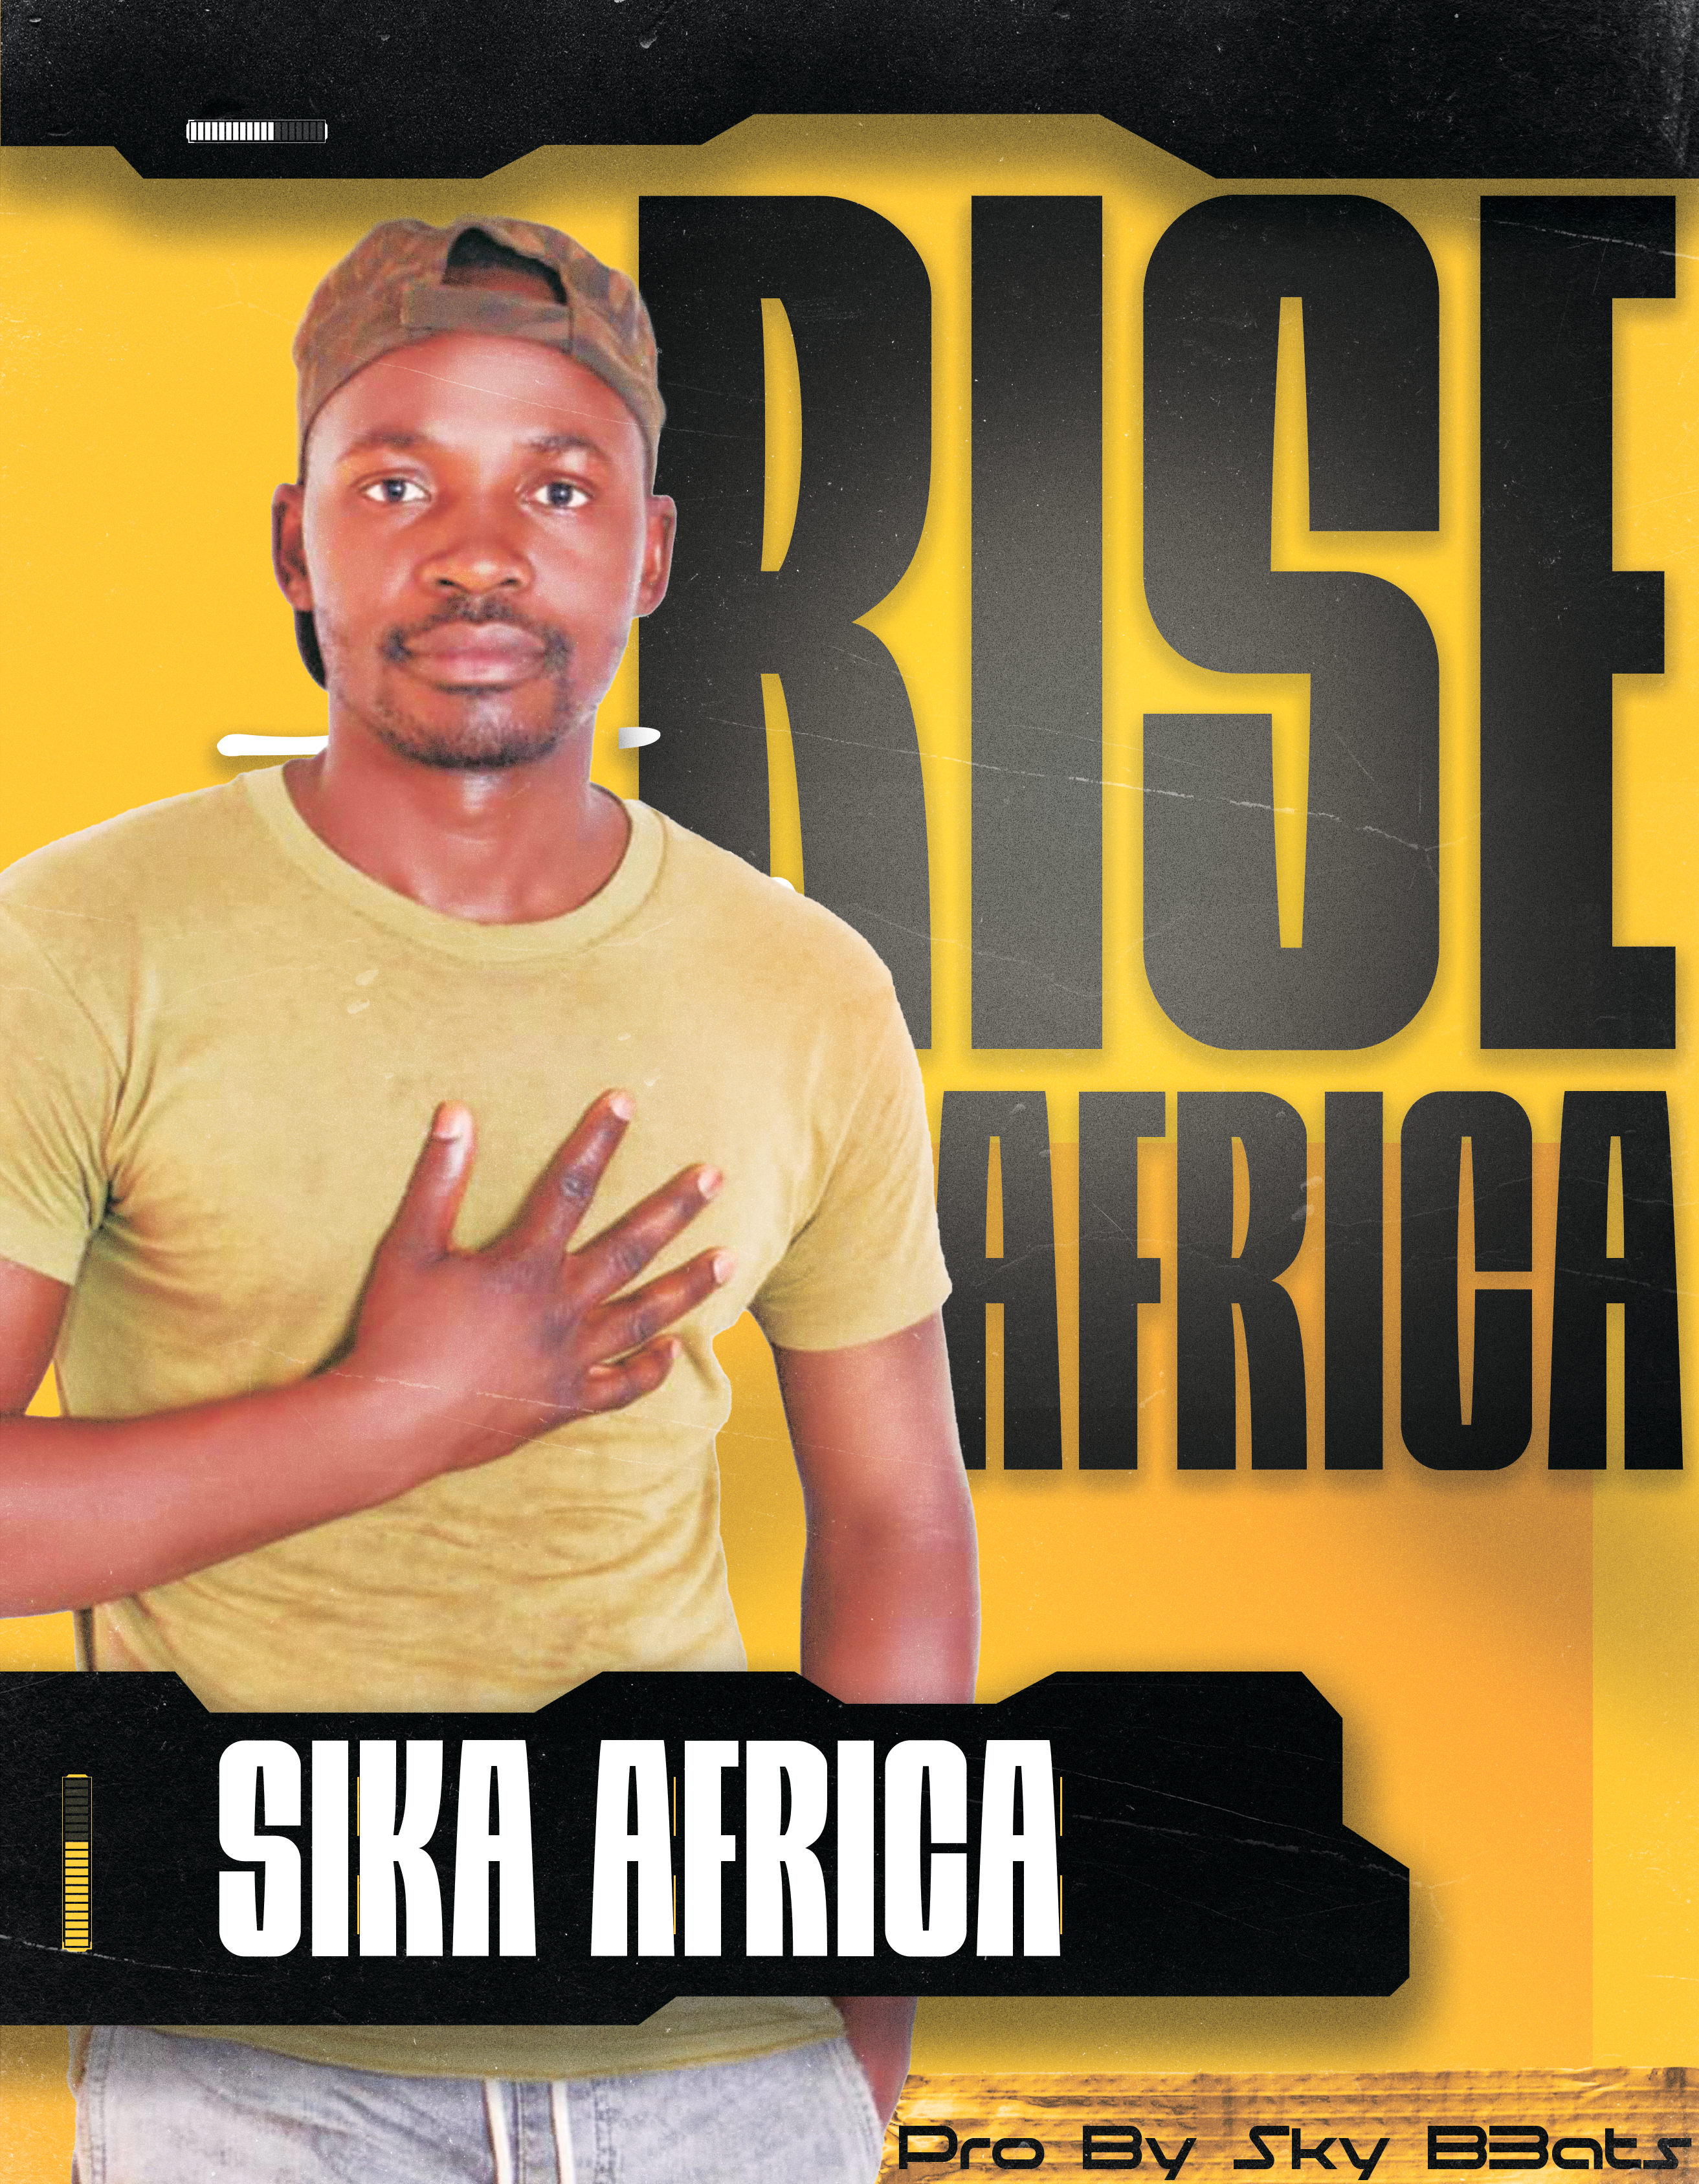 Sika Africa - Rise Africa (Pro by Spy Beats)